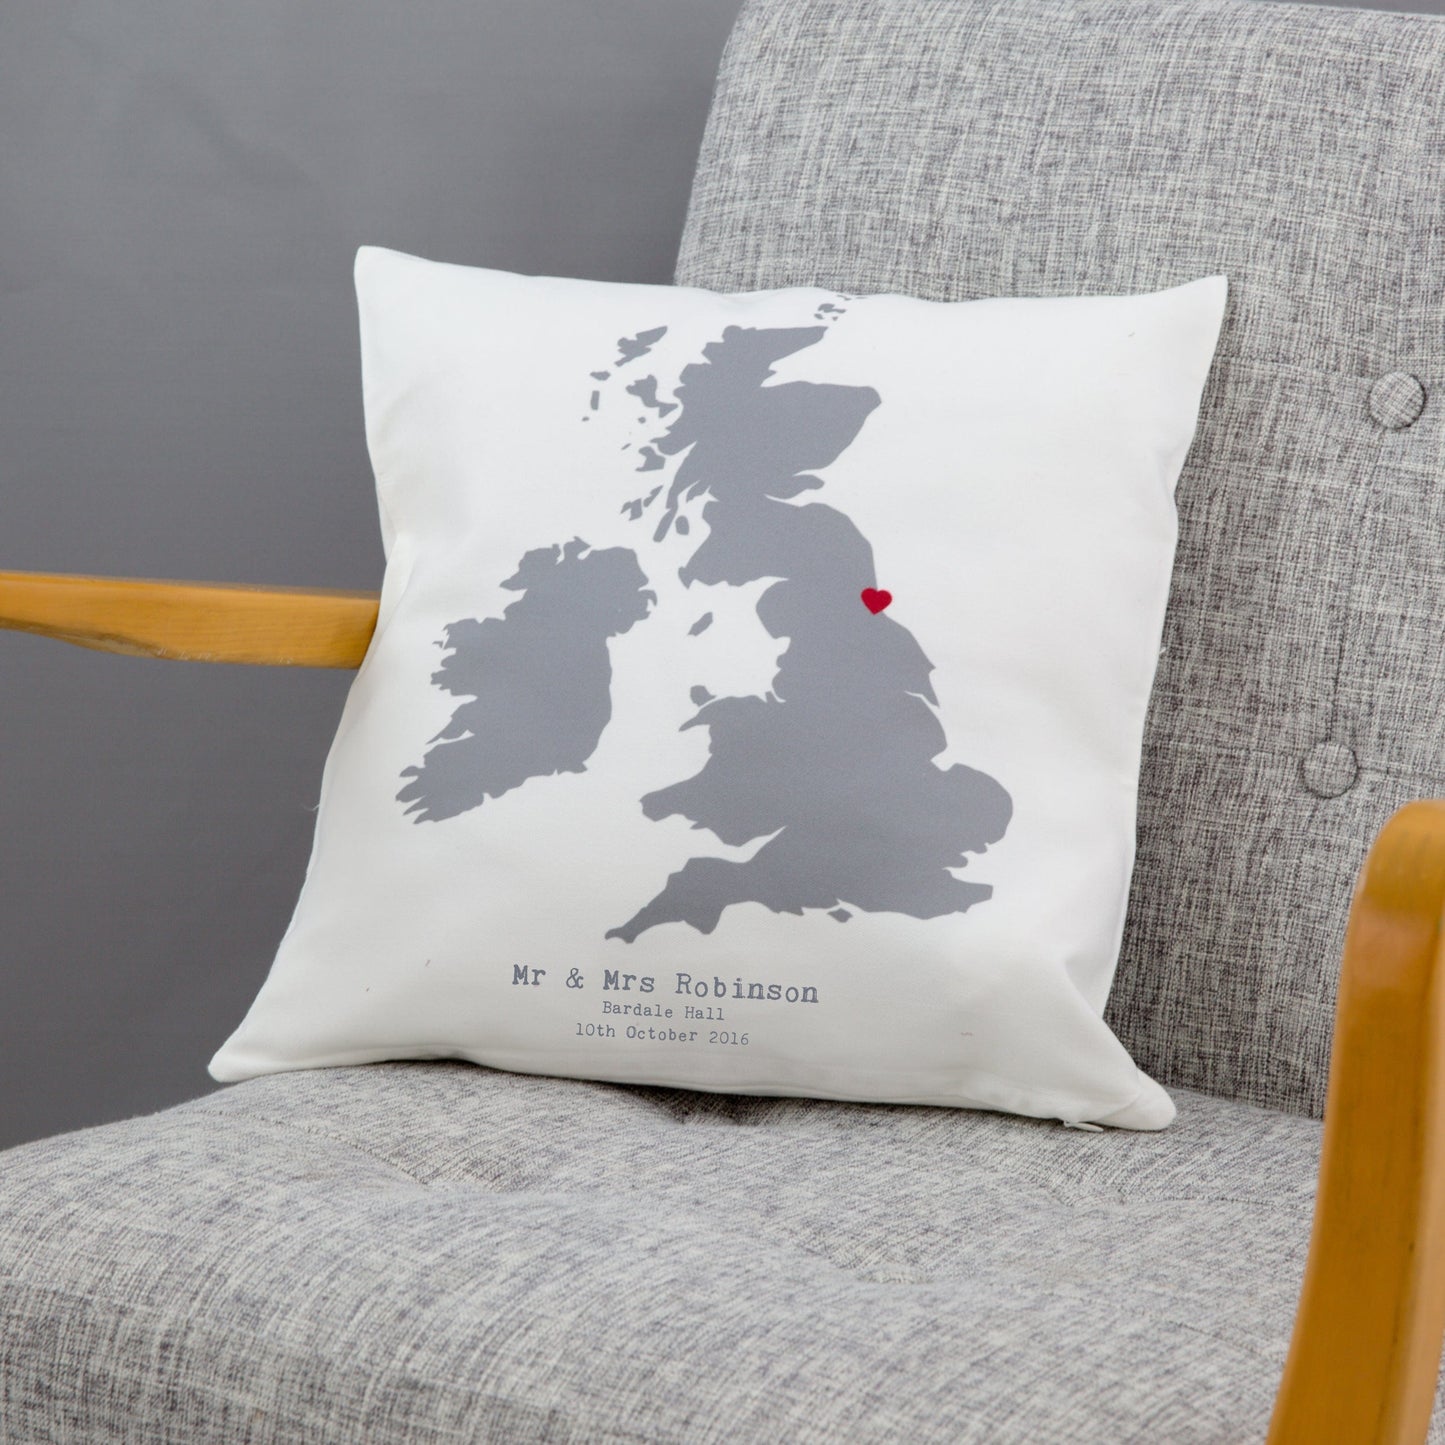 Cotton 2nd Anniversary Gift - Personalised Wedding Venue Location Map Cushion - For Him Or Her